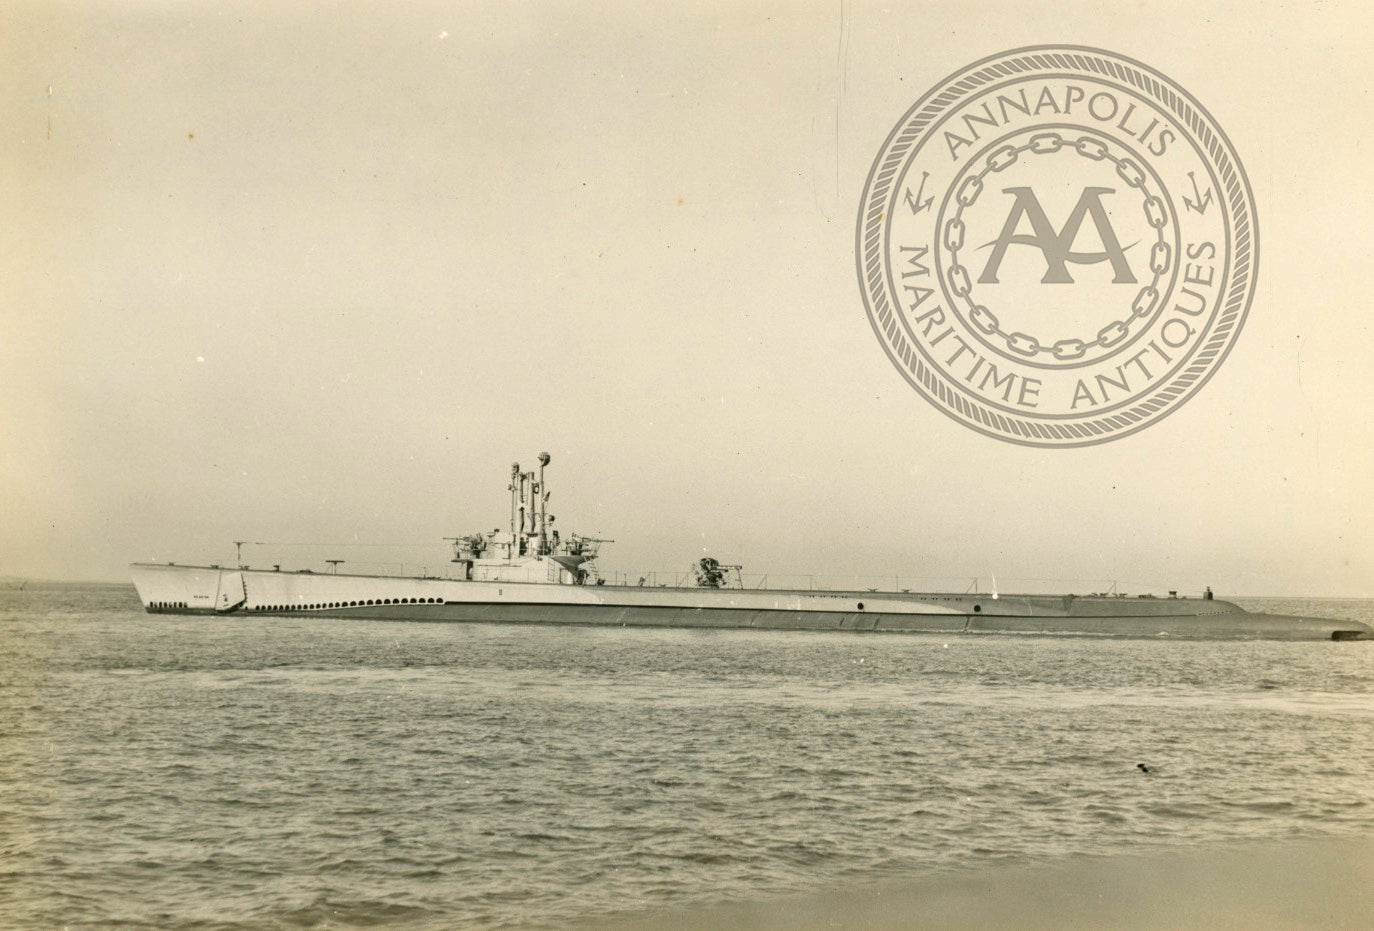 USS Clamagore (SS-343) Submarine + Blenny, Corporal, & Cobbler